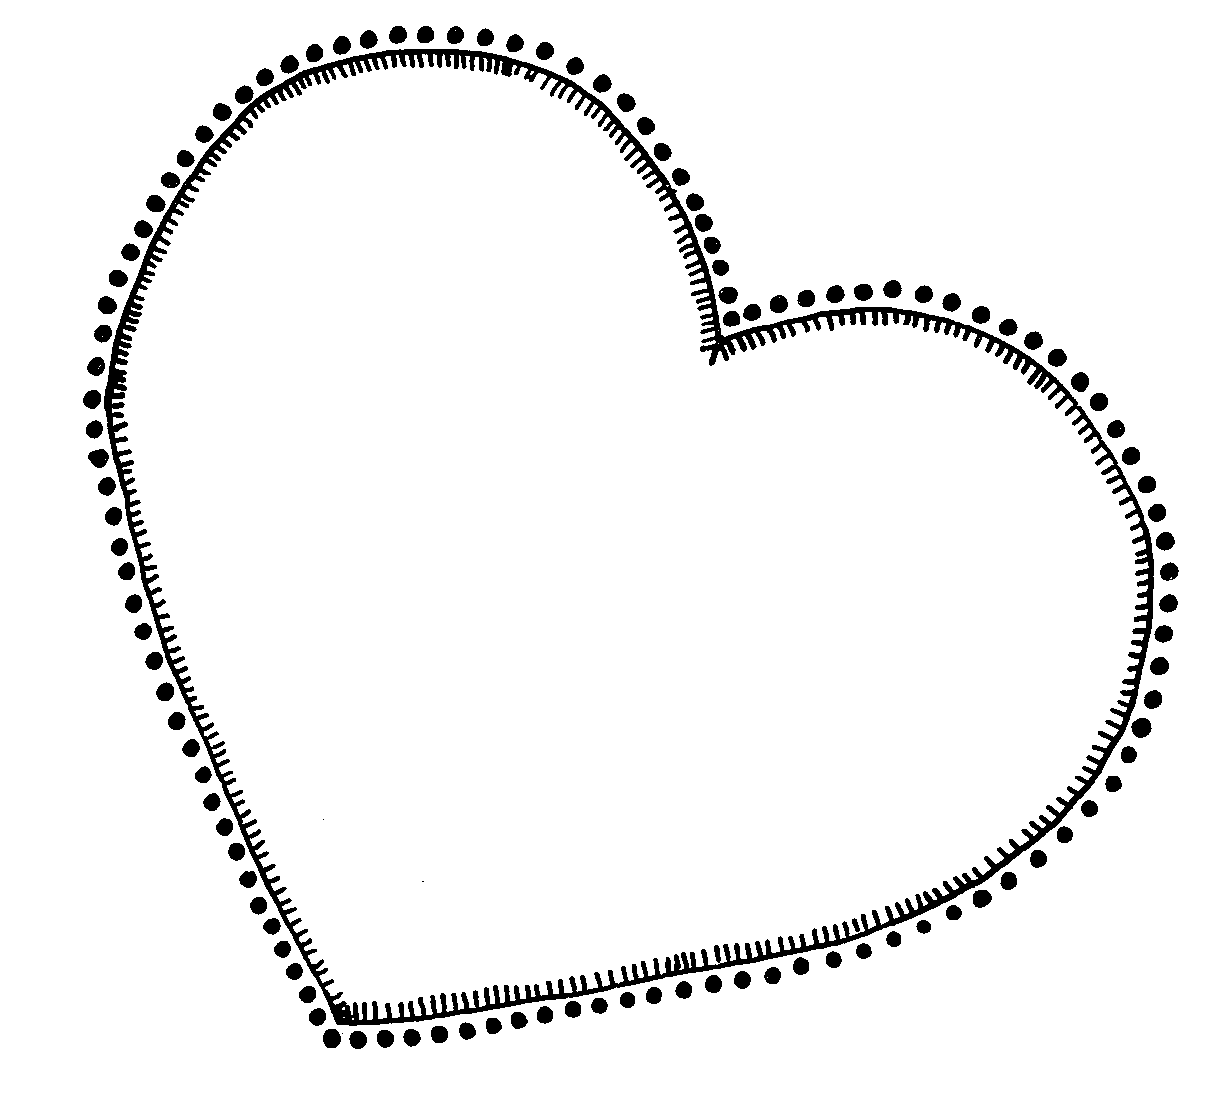 Heart Clipart Black And White - download clipart for free - wedding heart clipart, valentines day clipart, scribble heart clipart, rose gold heart clipart, red heart clip art free, red heart clip art, heart wreath clipart, heart scroll clip art, heart pink clipart, heart garland clipart, heart clipart red, heart clipart, heart clip art, heart candy clipart, heart banner clipart, free clipart valentines hearts, conversation heart clip art, clip art heart outline, art-works for free, animal heart clip art